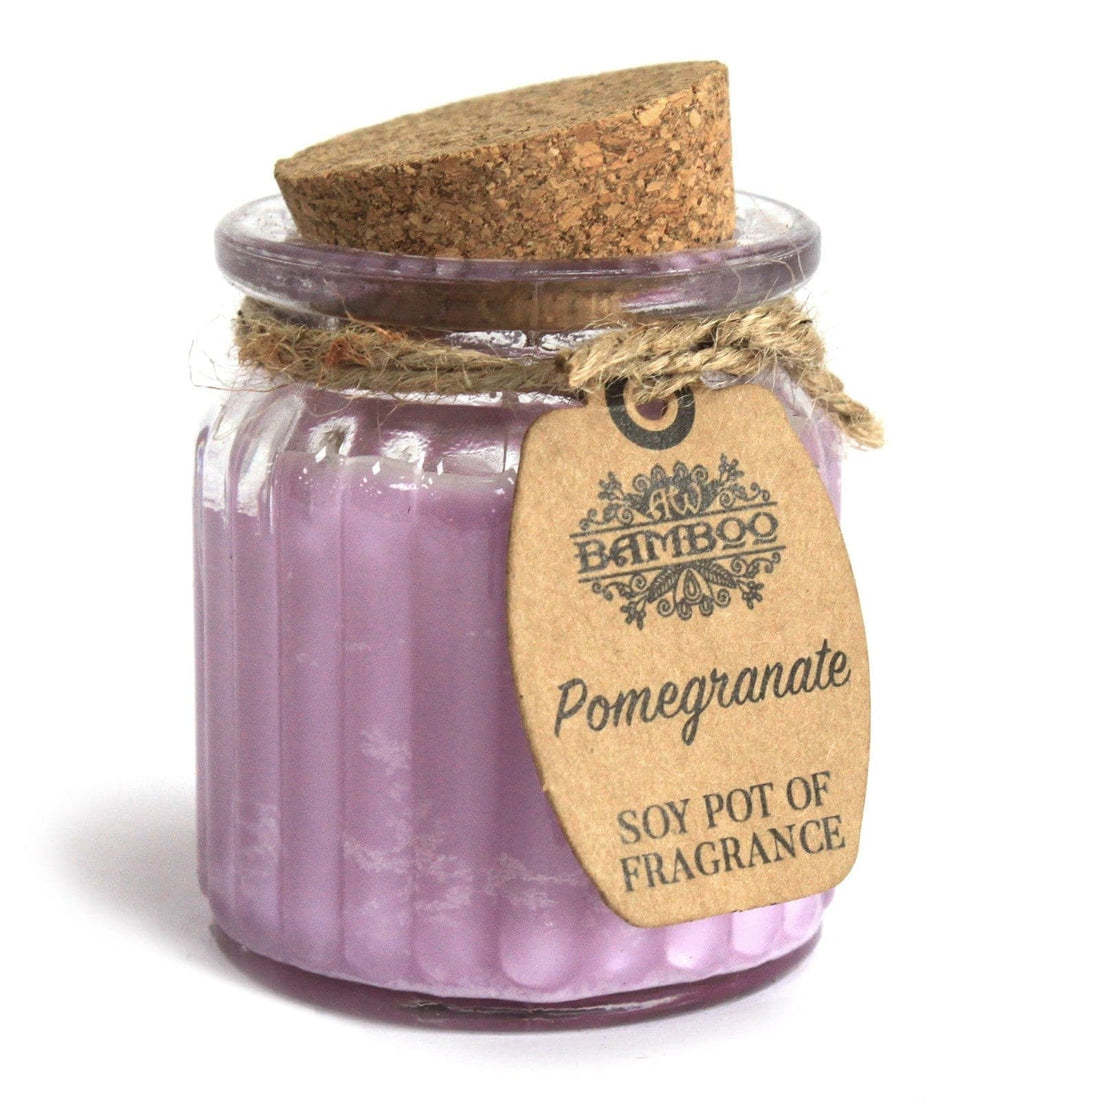 Pomegranate Soy Pot of Fragrance Candle - best price from Maltashopper.com SOYP-09